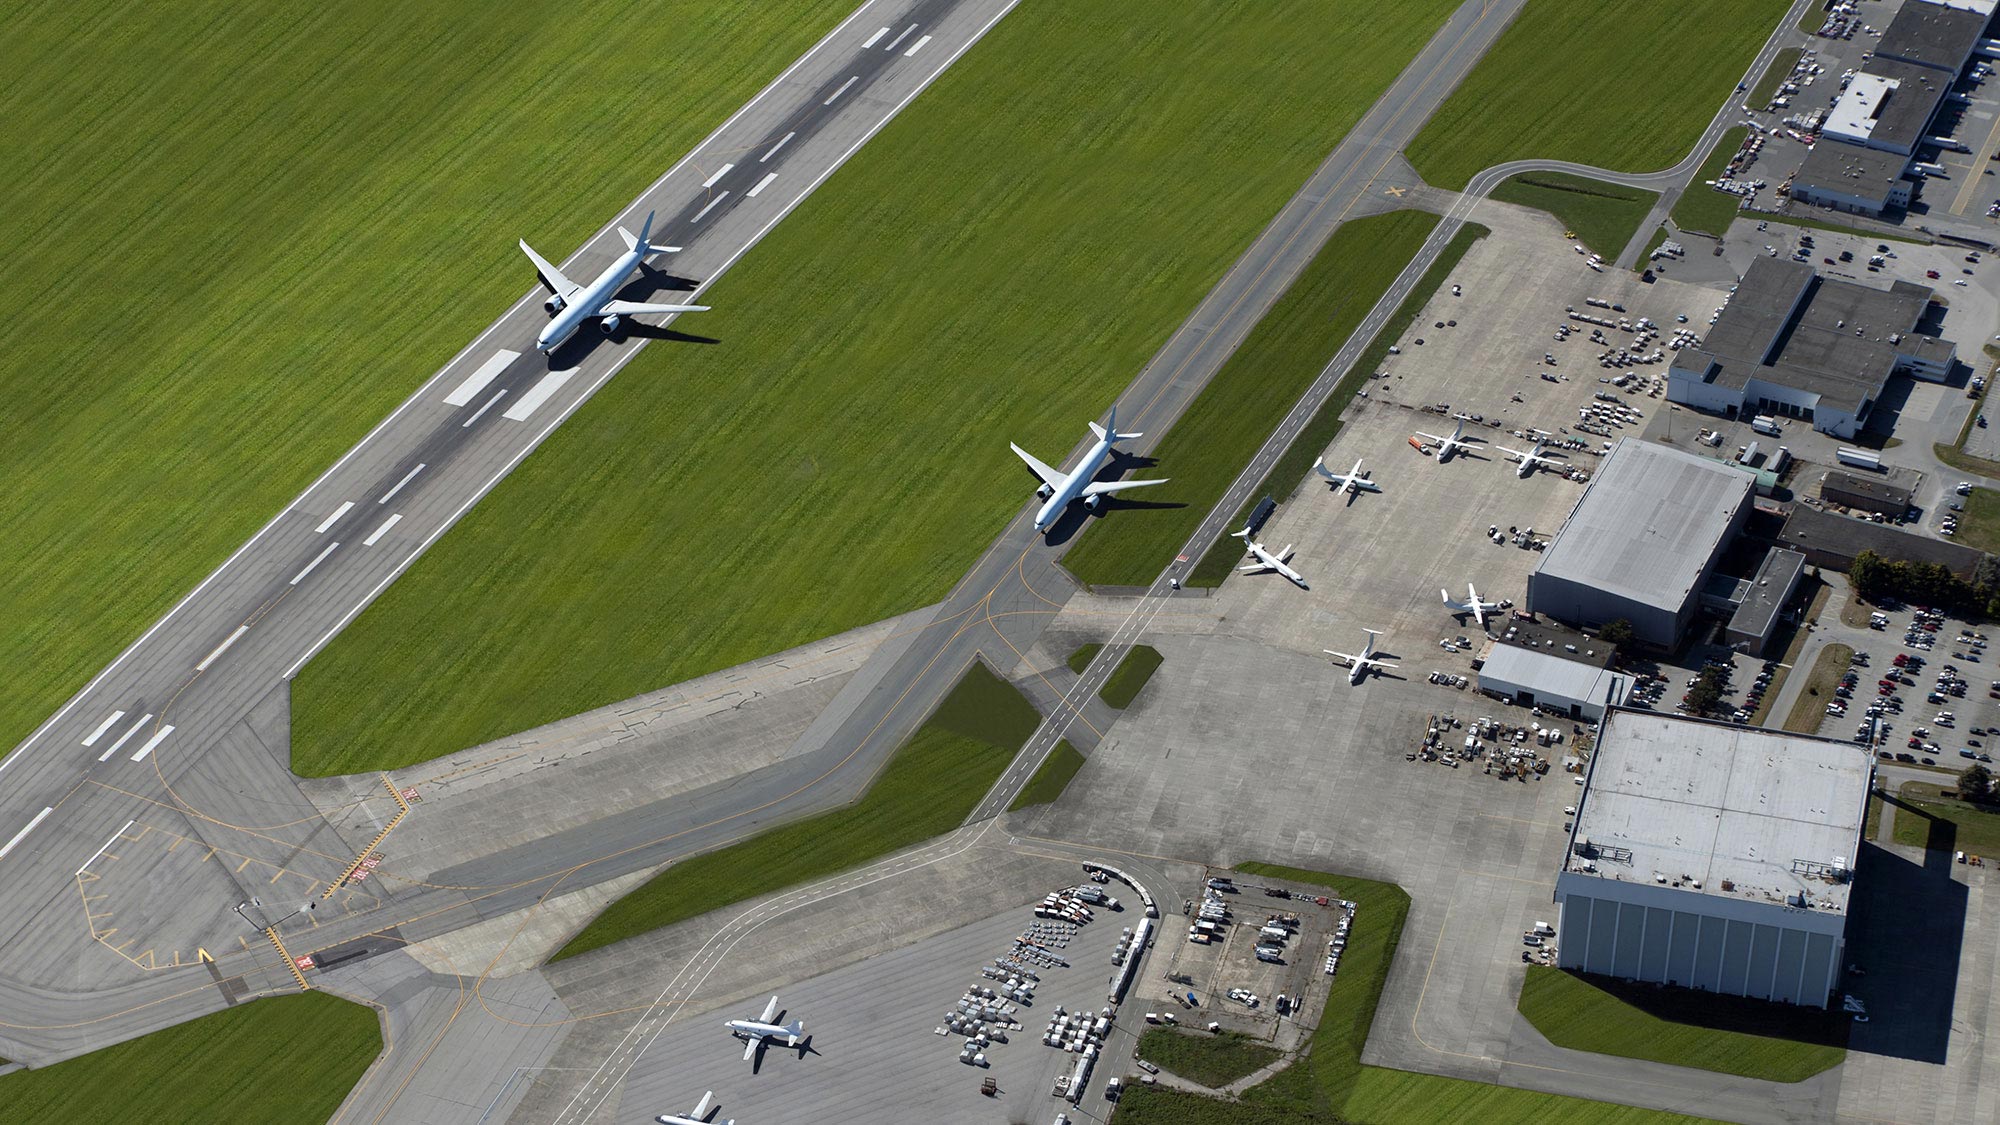 Airport - runways and airplanes